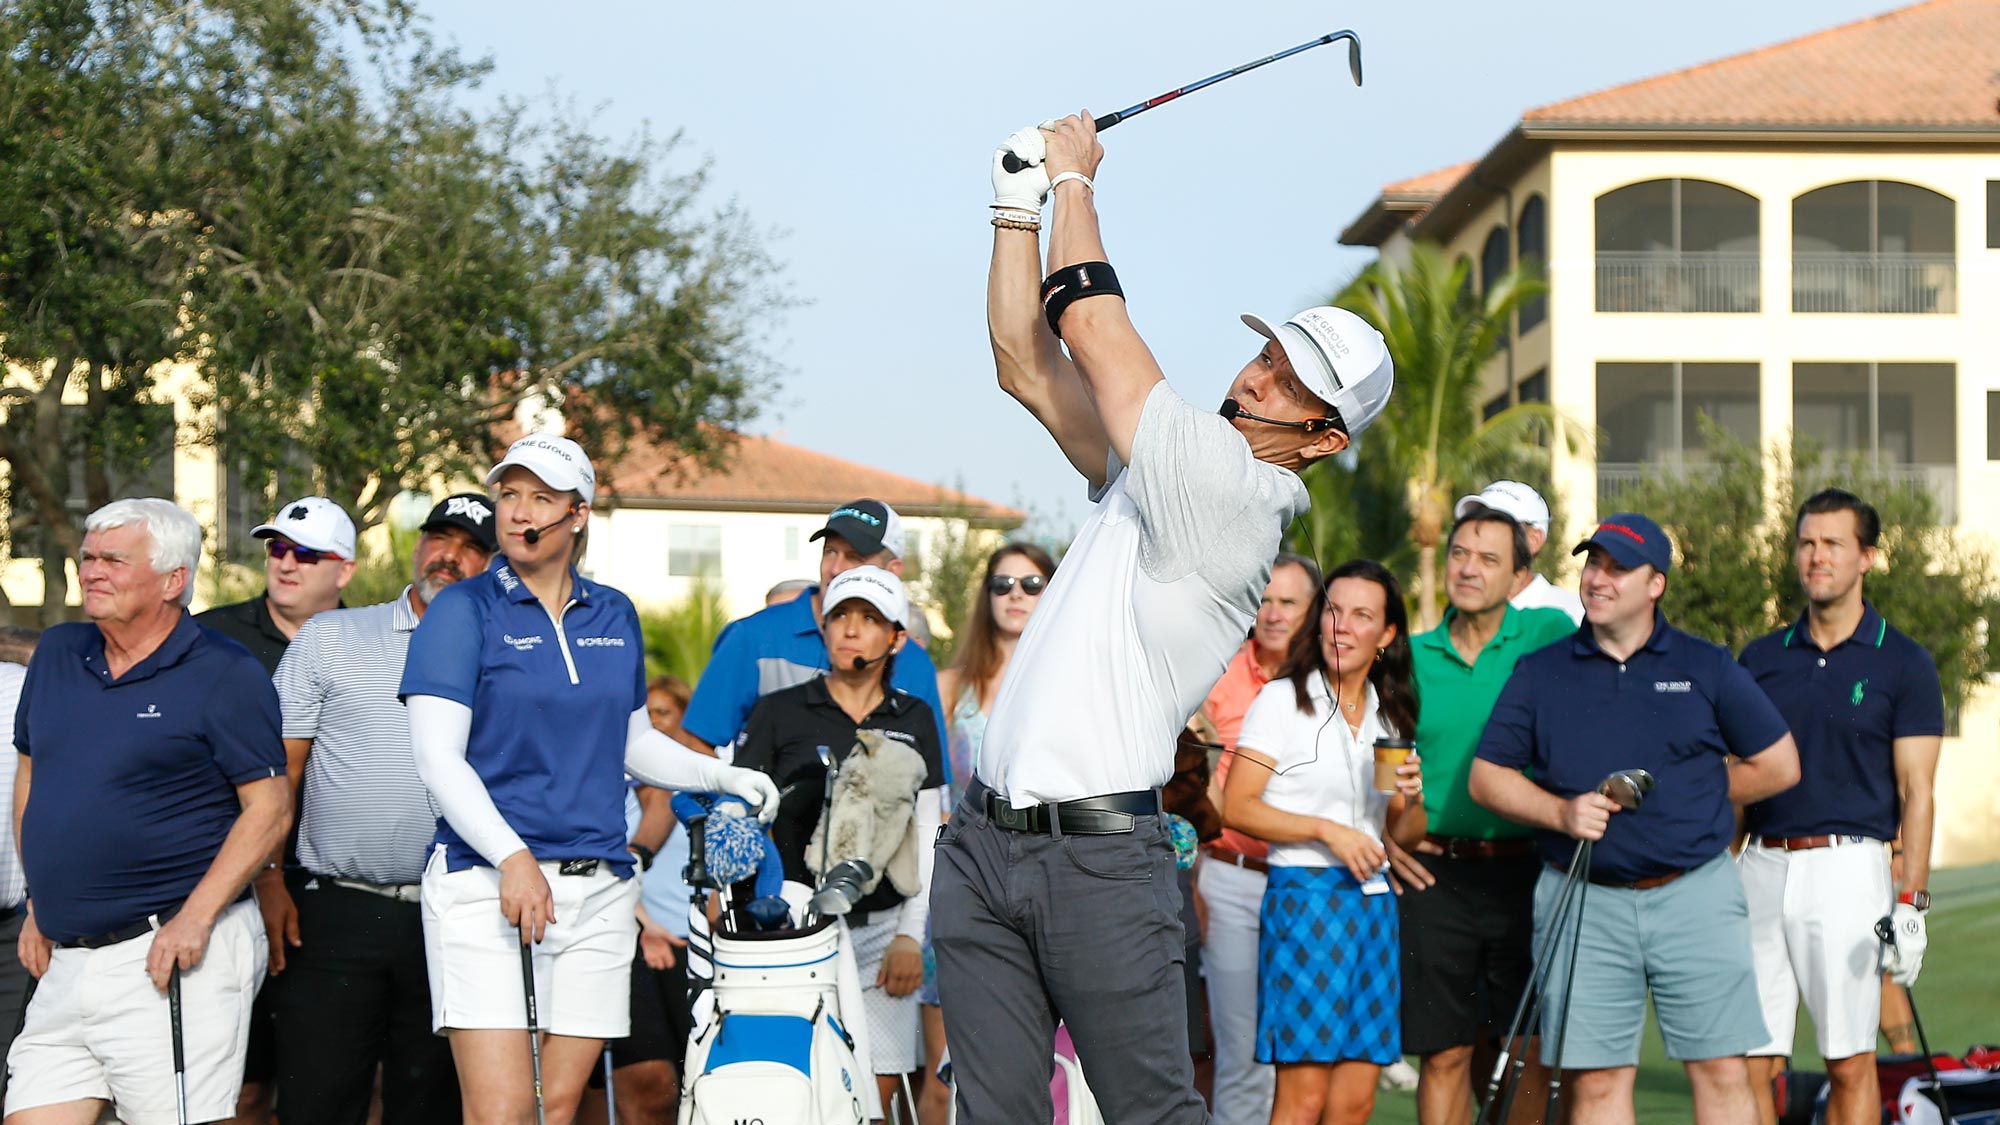 Actor Mark Wahlberg plays a shot during the CME Group charity event to benefit St. Jude Children's Research Hospital prior to the LPGA CME Group Tour Championship